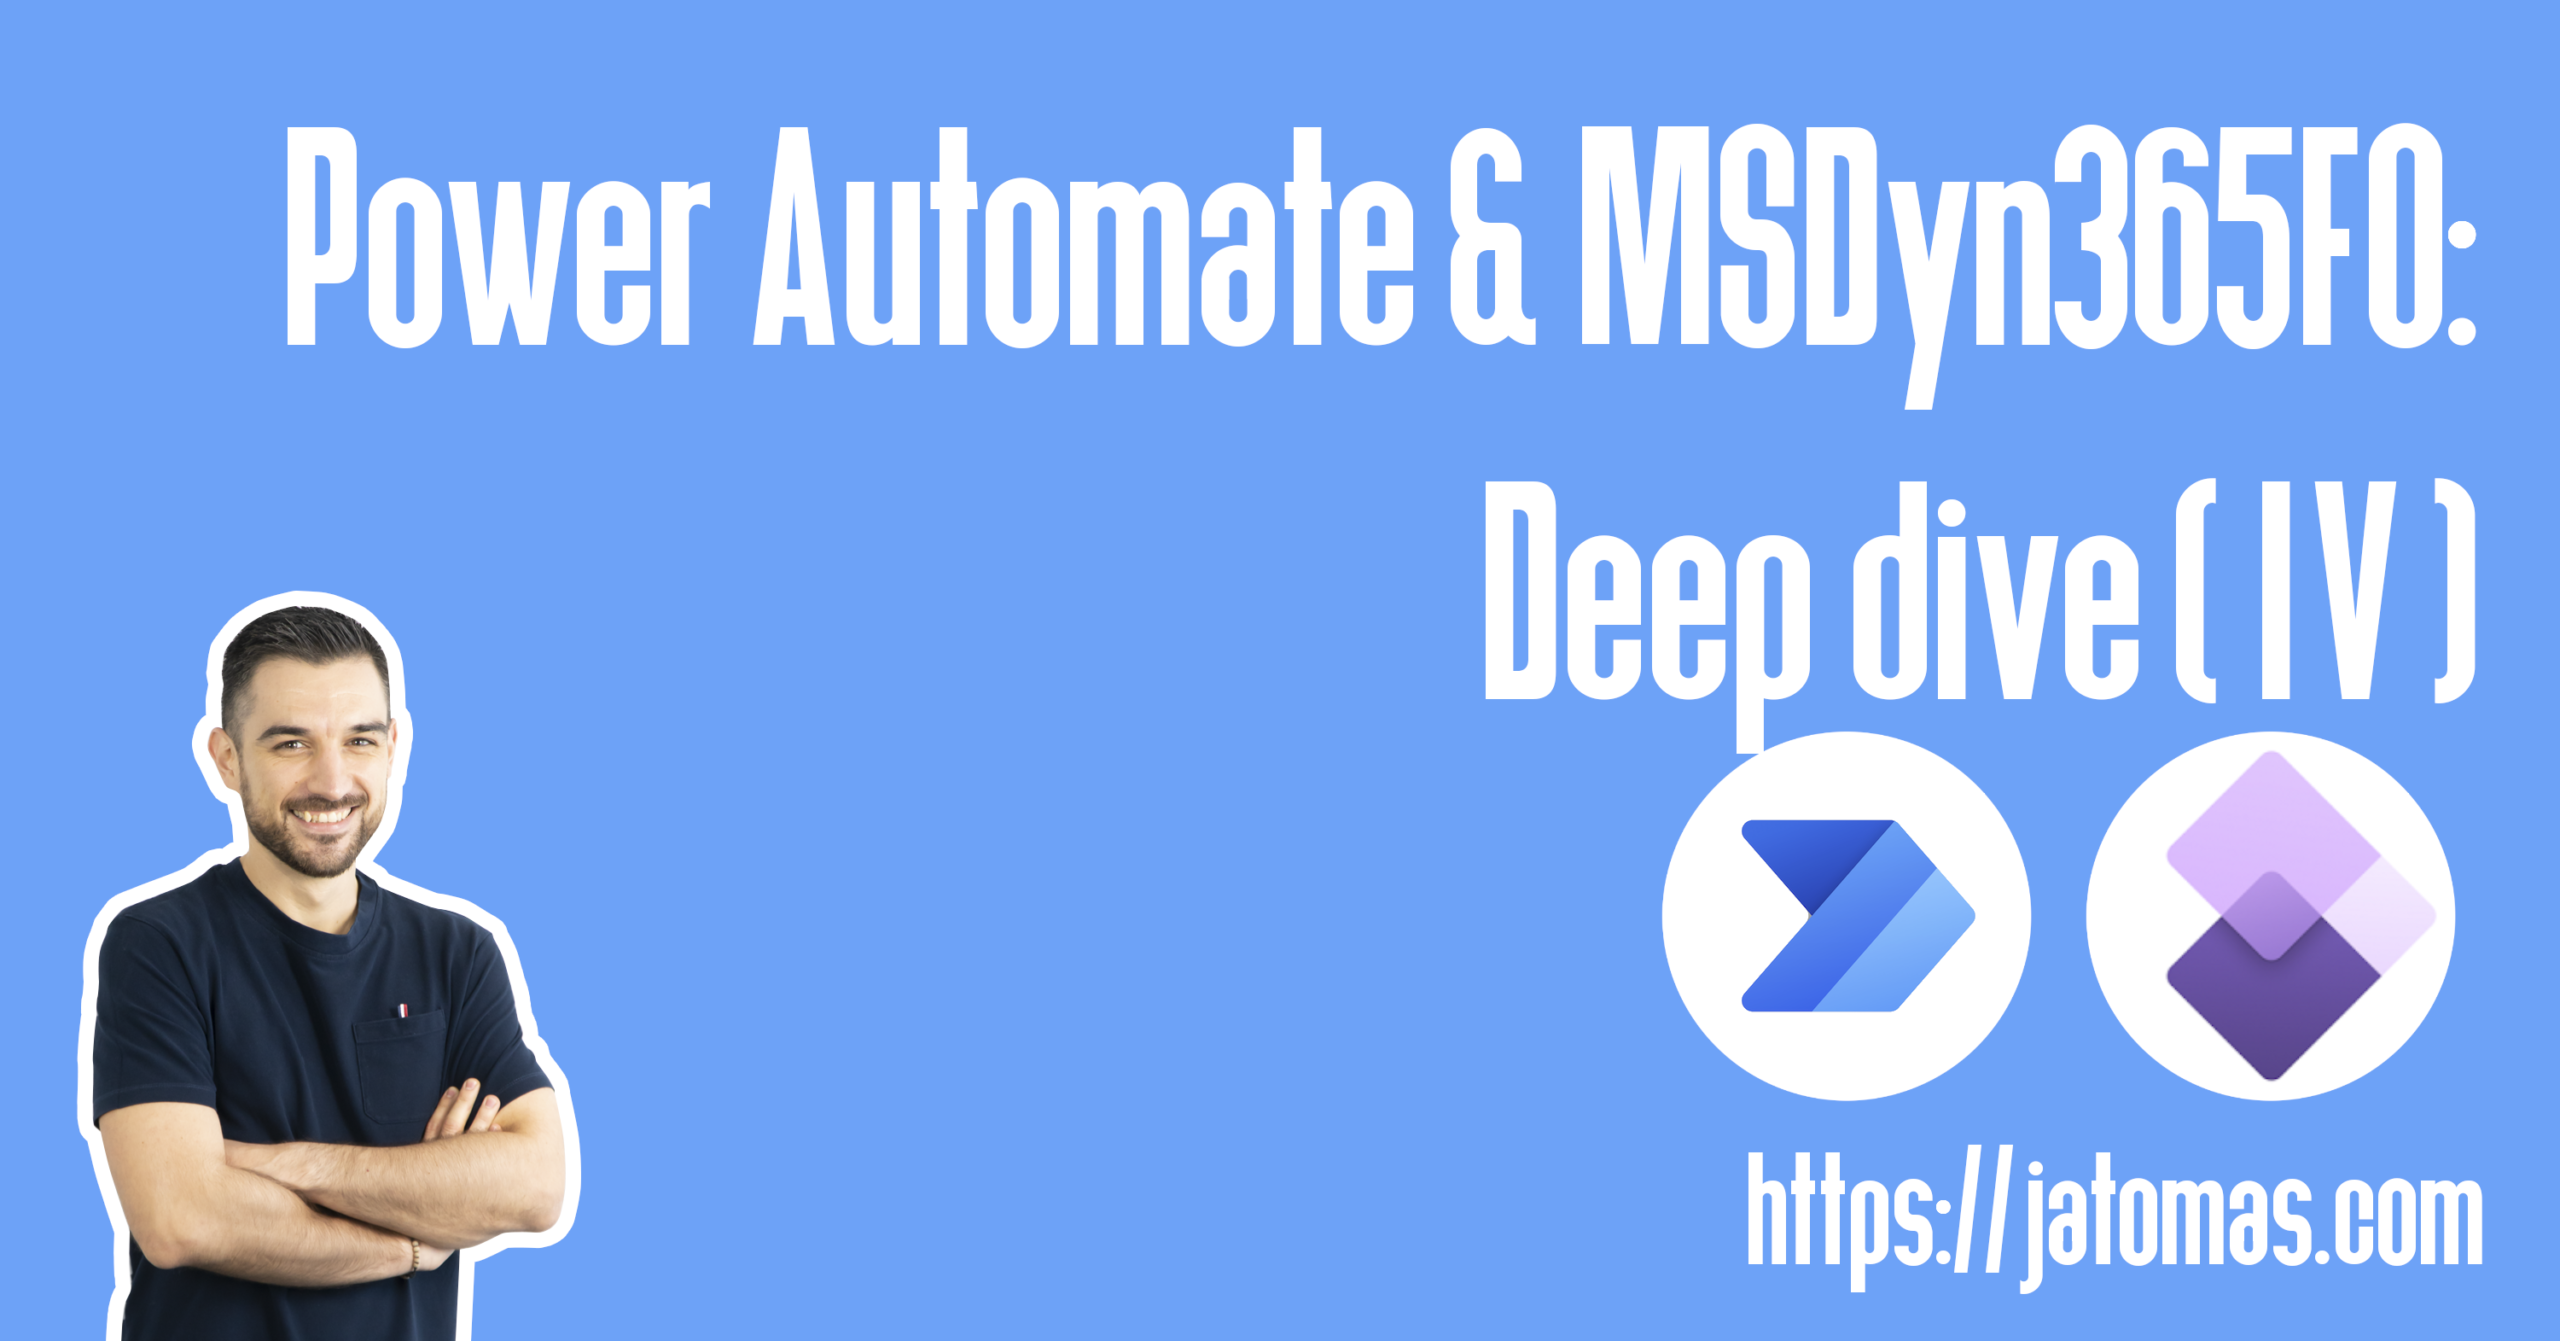 Power Automate & MSDyn365FO: Deep dive (IV)